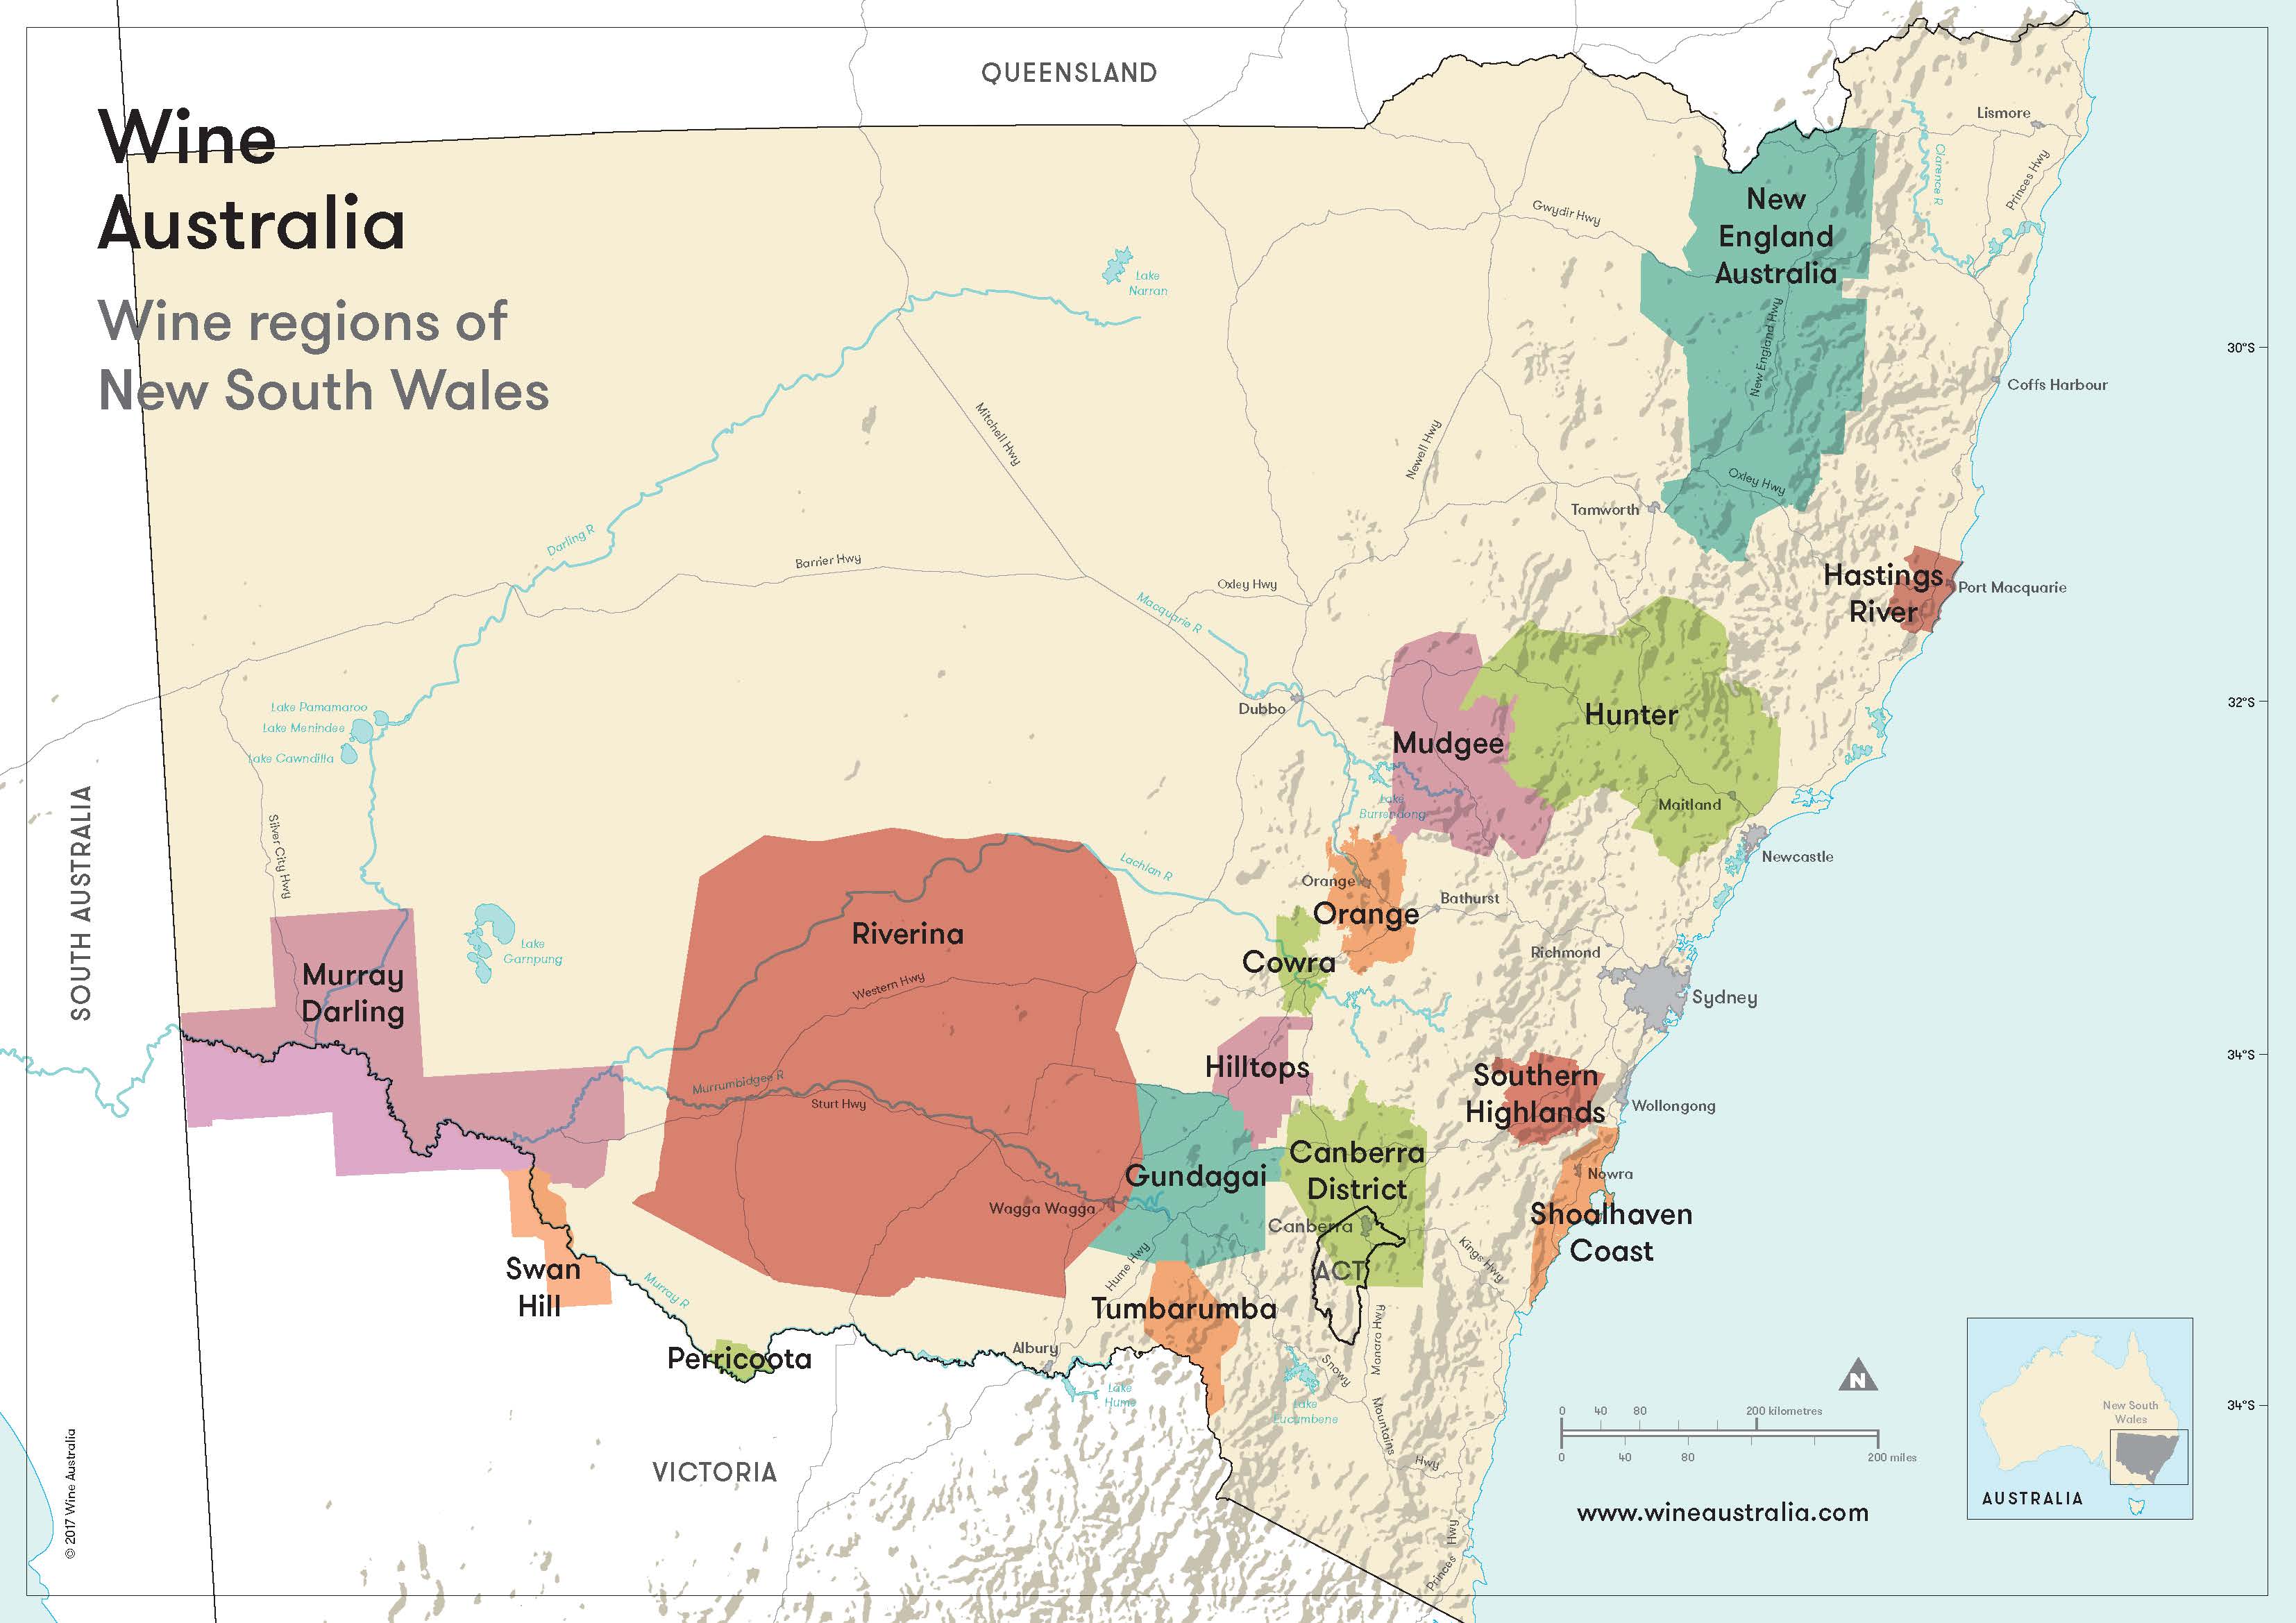 Map of the wine regions of New South Wales